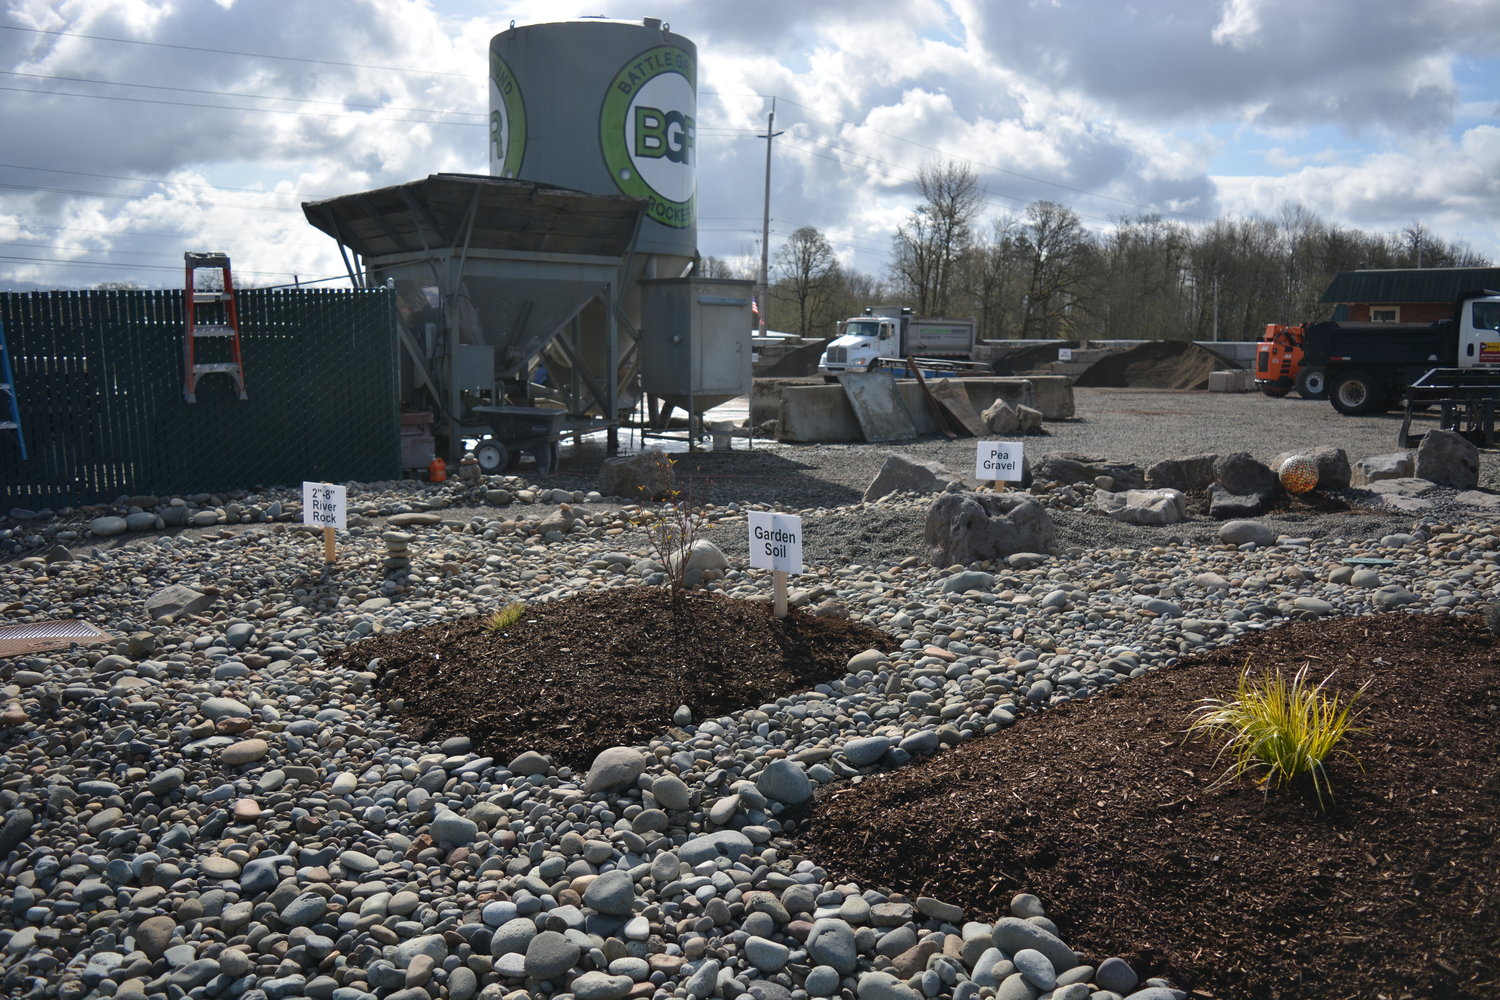 Along with the display to see the product up close, Battle Ground Rockery has set up a “viewing area” for customers to see how the product would look on their property.